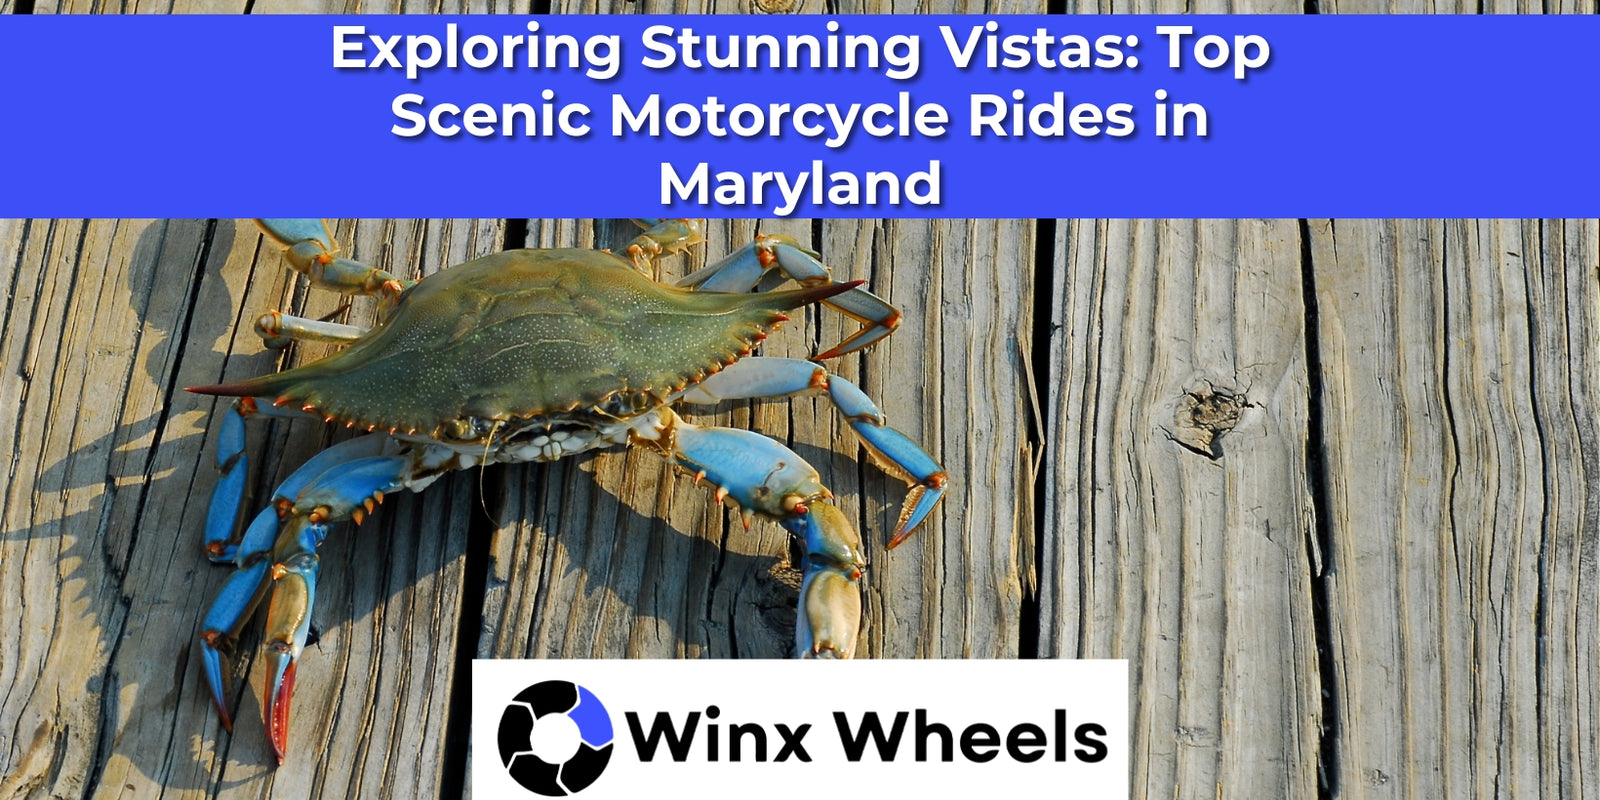 Exploring Stunning Vistas: Top Scenic Motorcycle Rides in Maryland